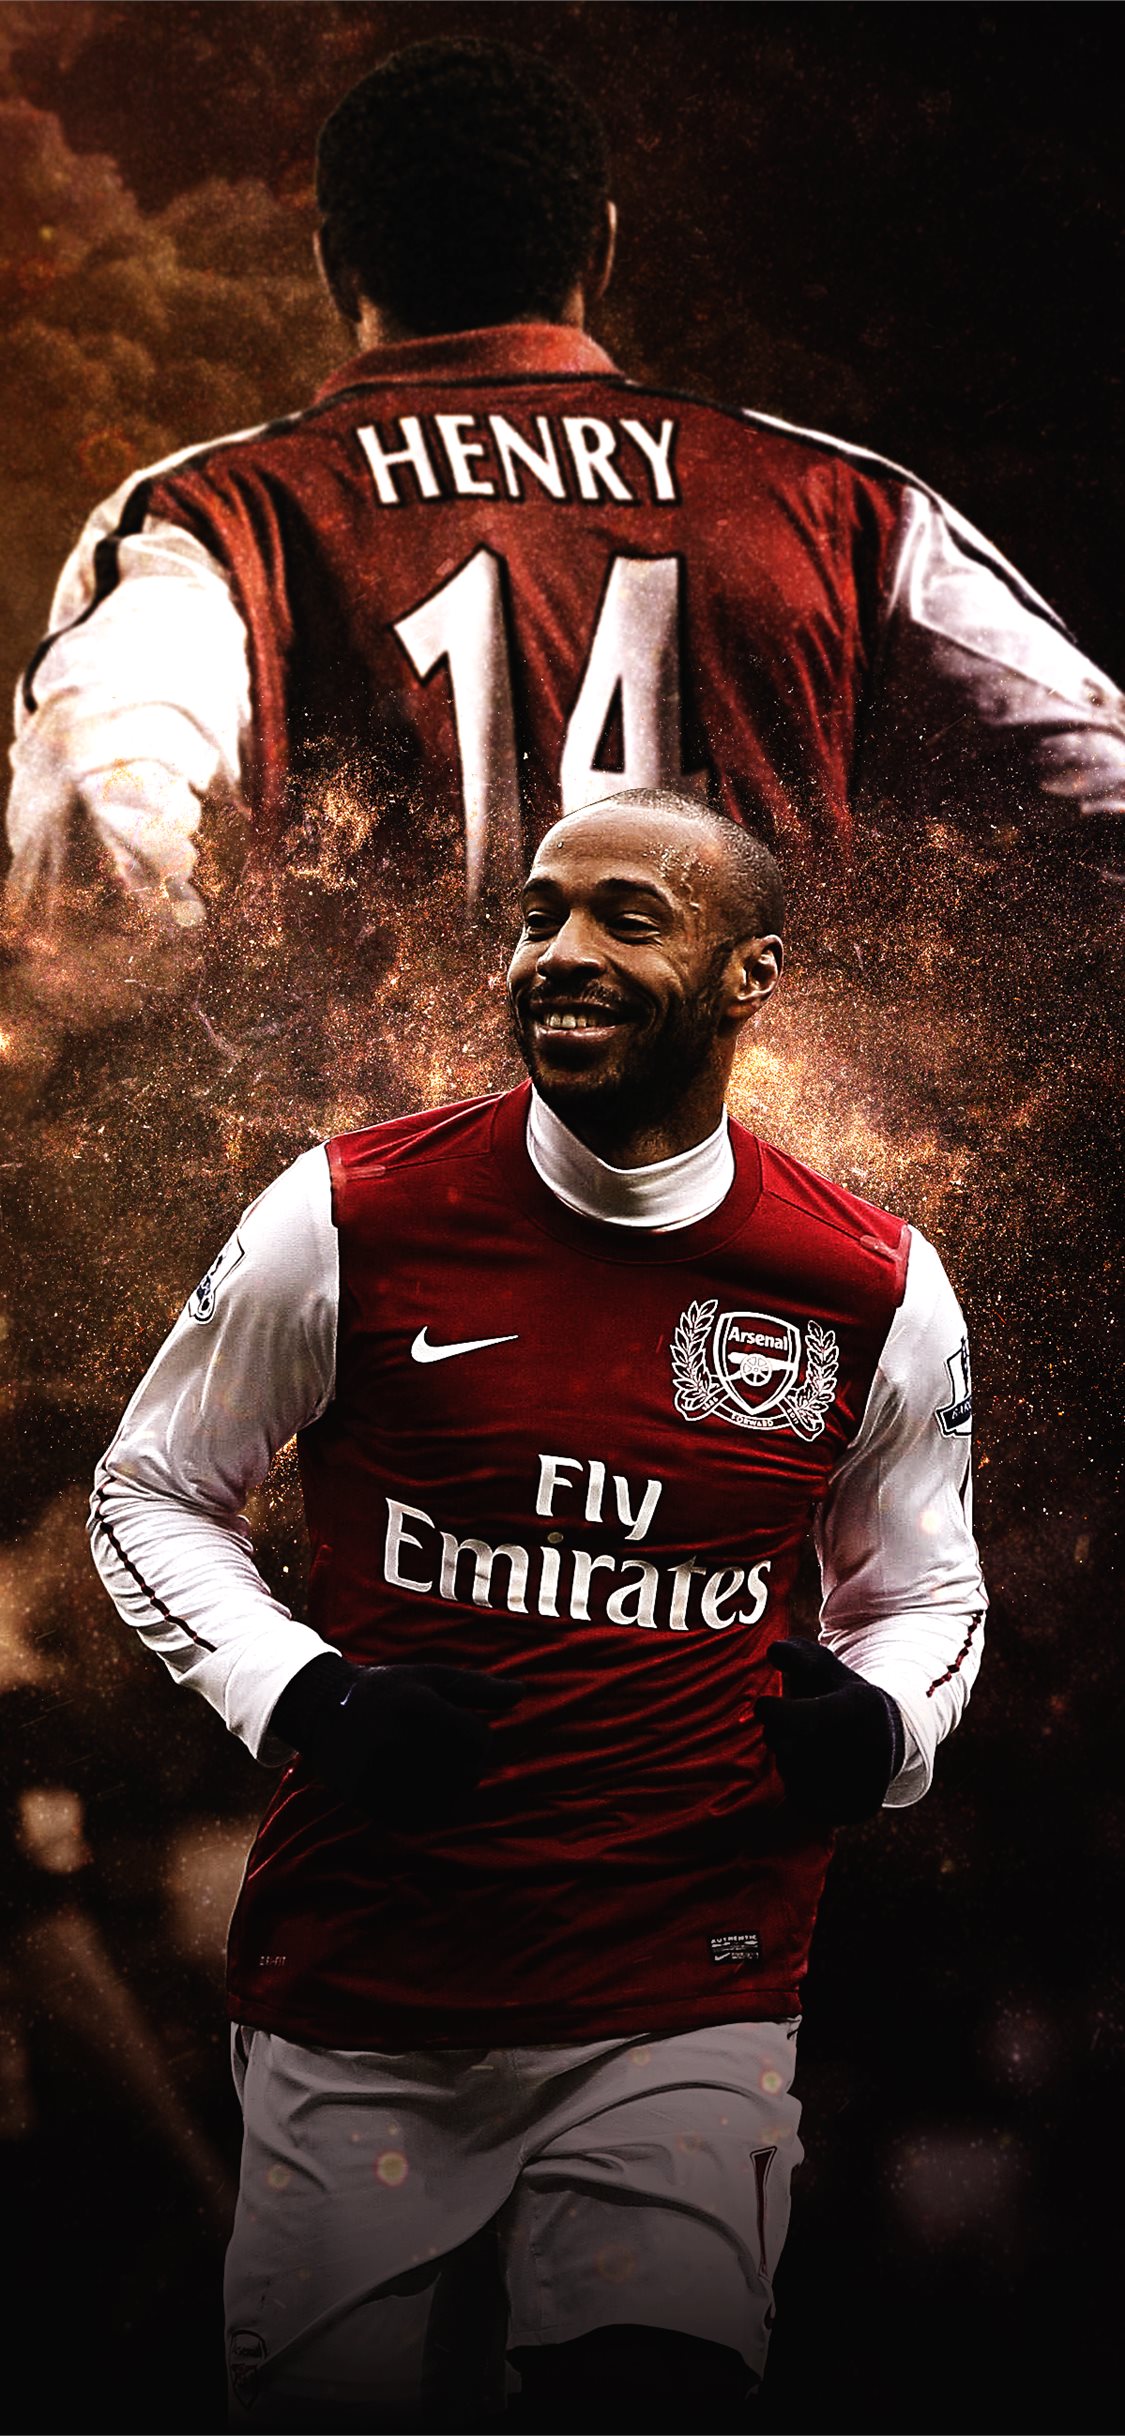 Arsenal IPhone Wallpaper 82 images